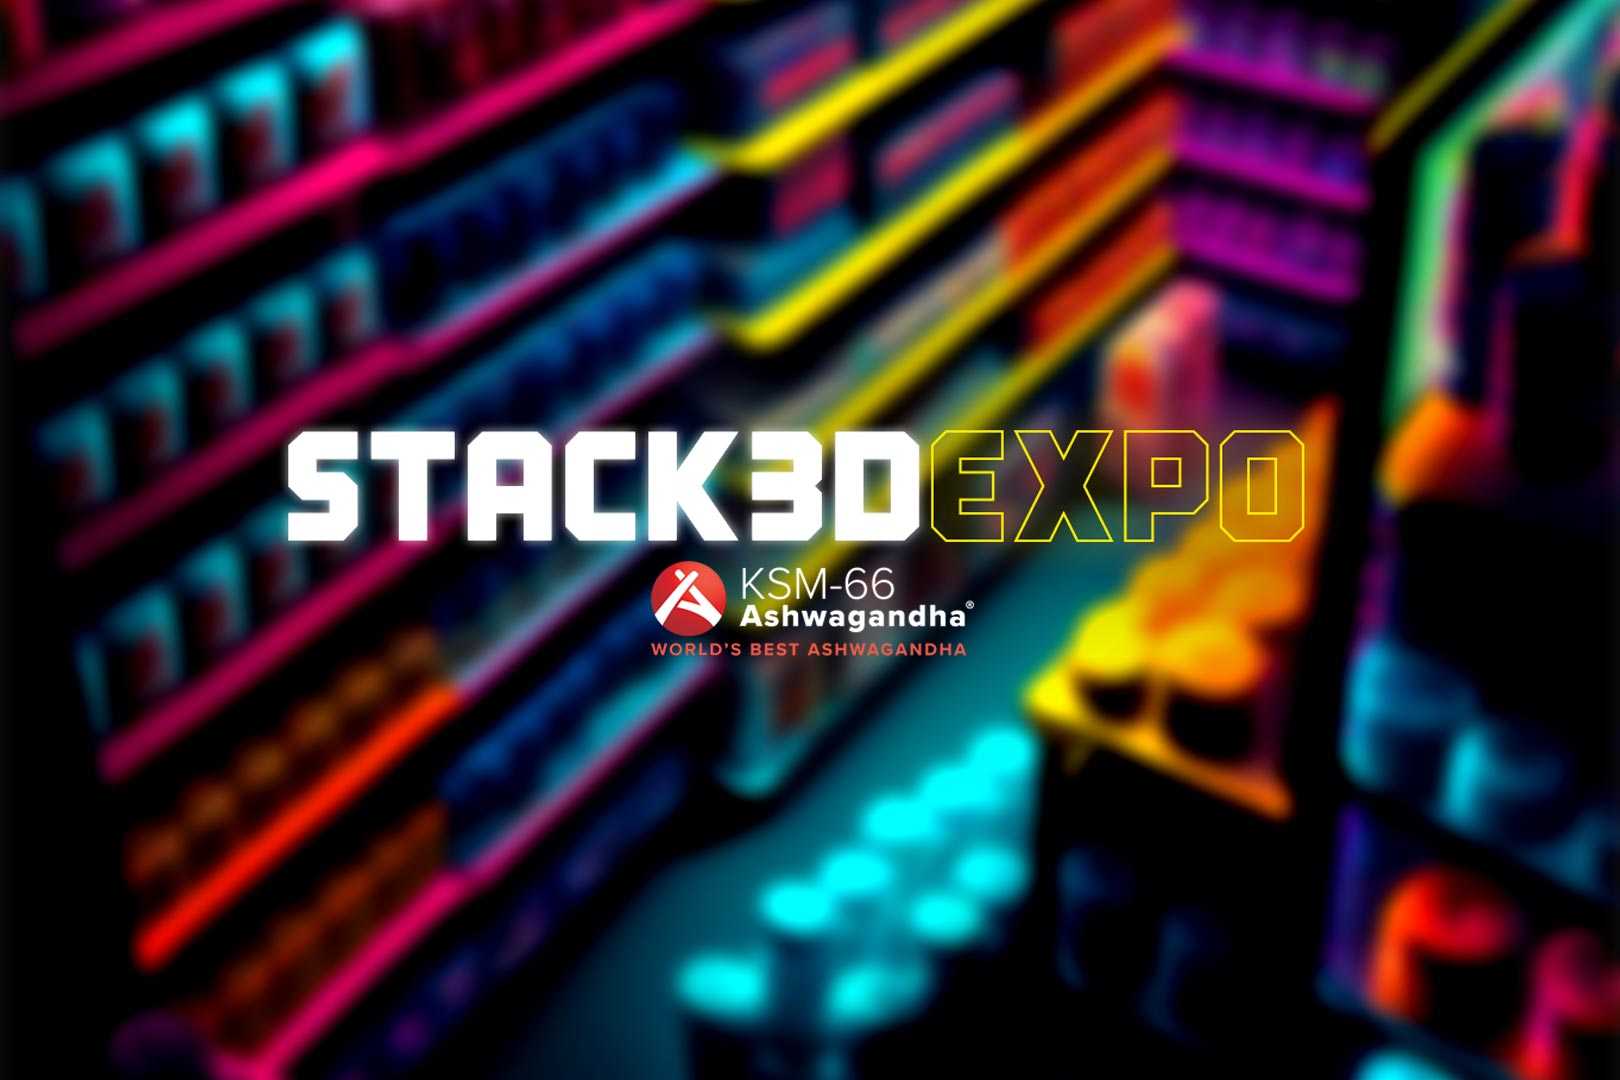 Premium KSM-66 Ashwagandha the title sponsor of this year’s Stack3d Expo